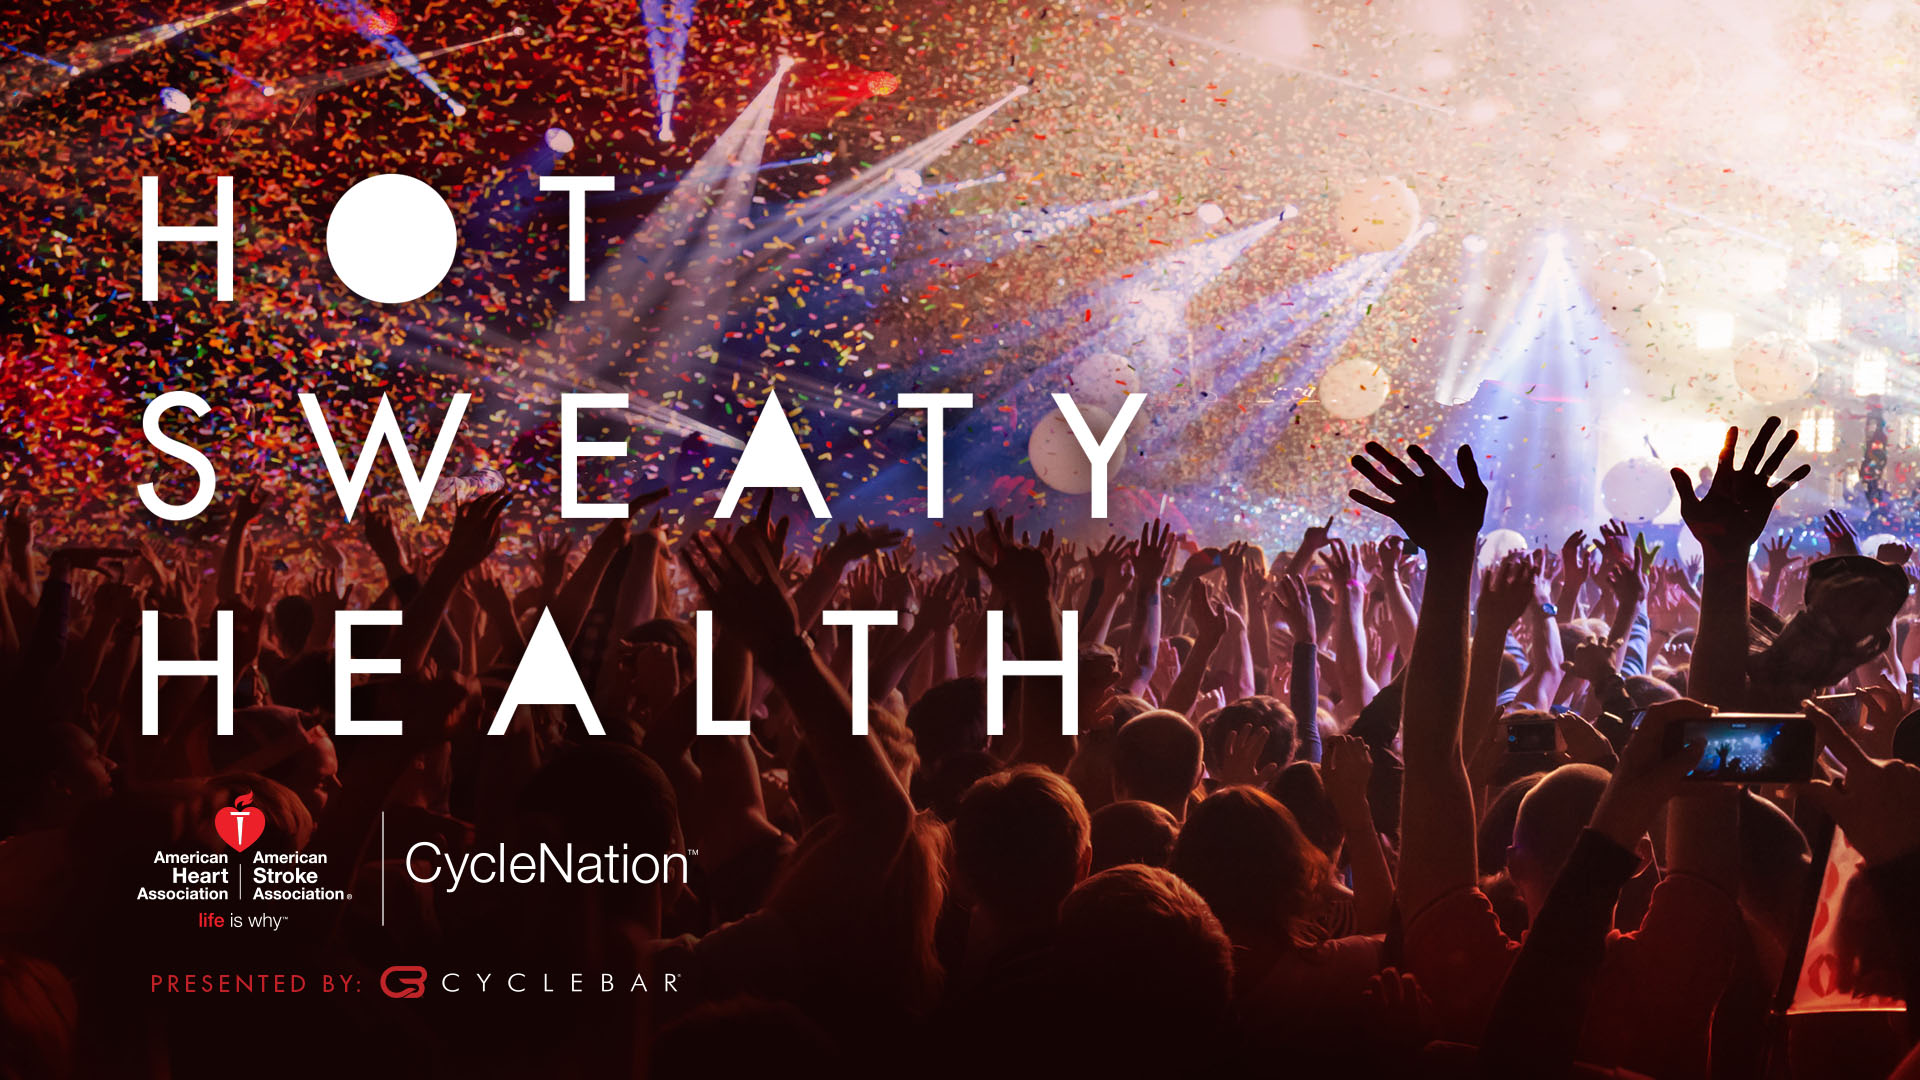 CYCLENATION LAUNCH CAMPAIGN